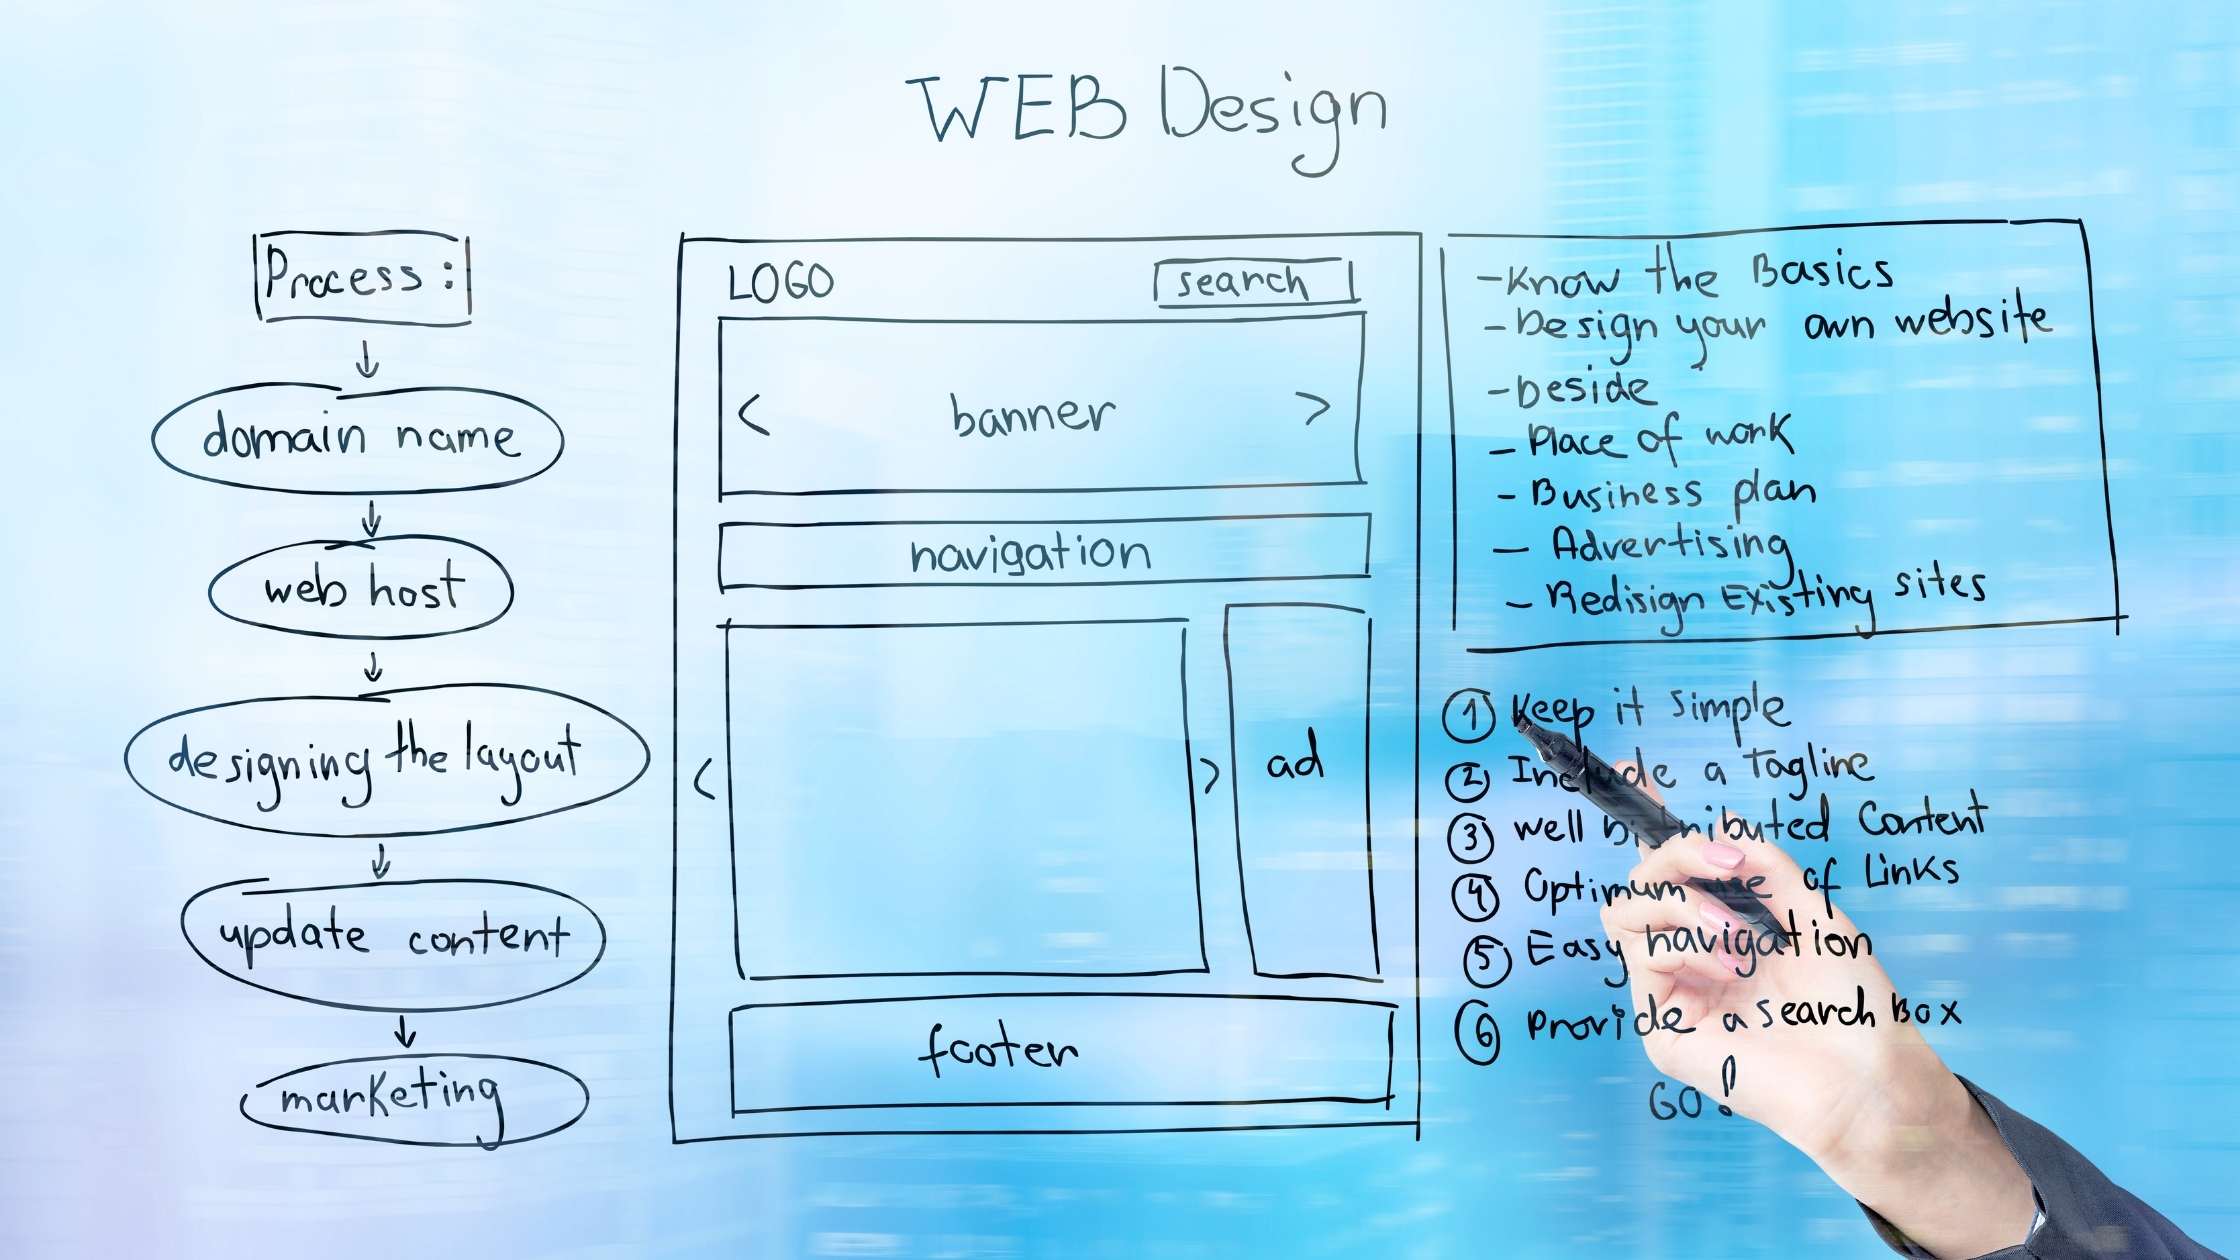 Graphic showing a web design layout on a whiteboard.